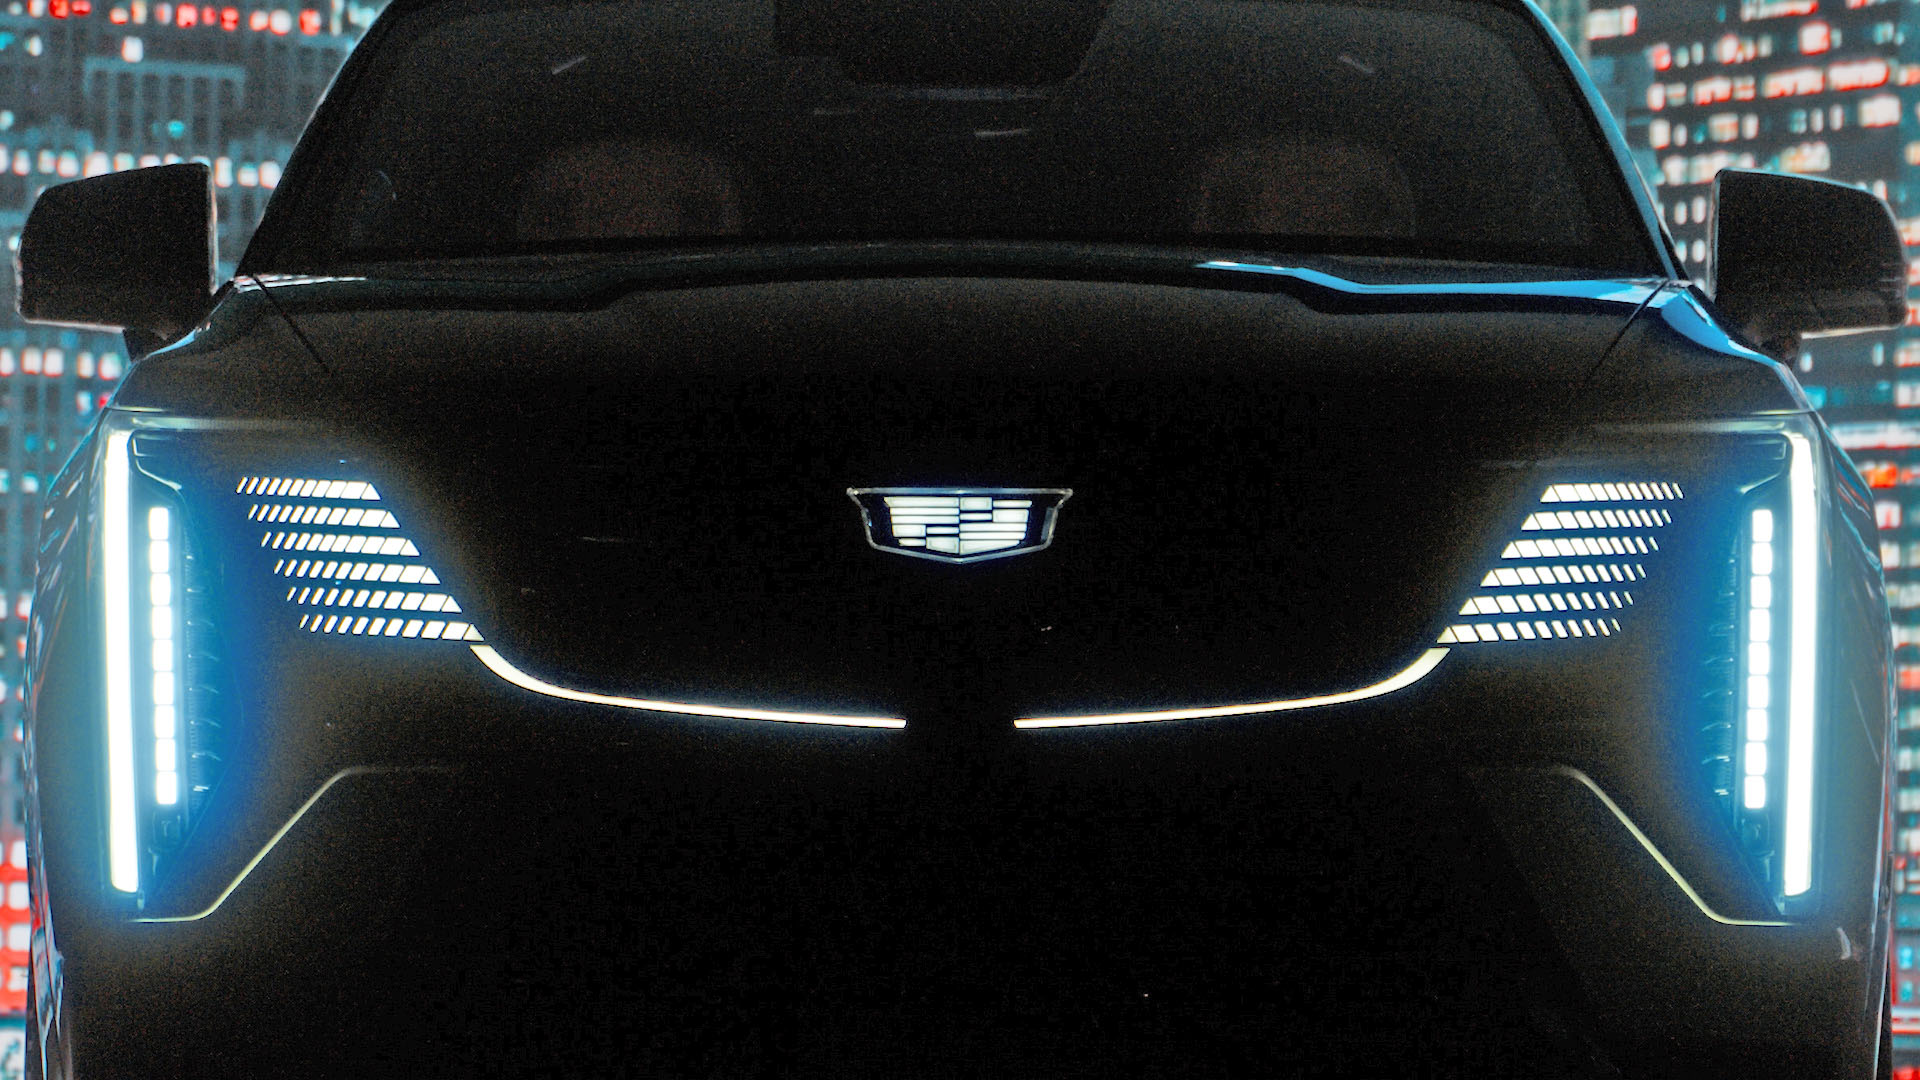 Electric Cadillac Escalade IQ Will Be Revealed on August 9